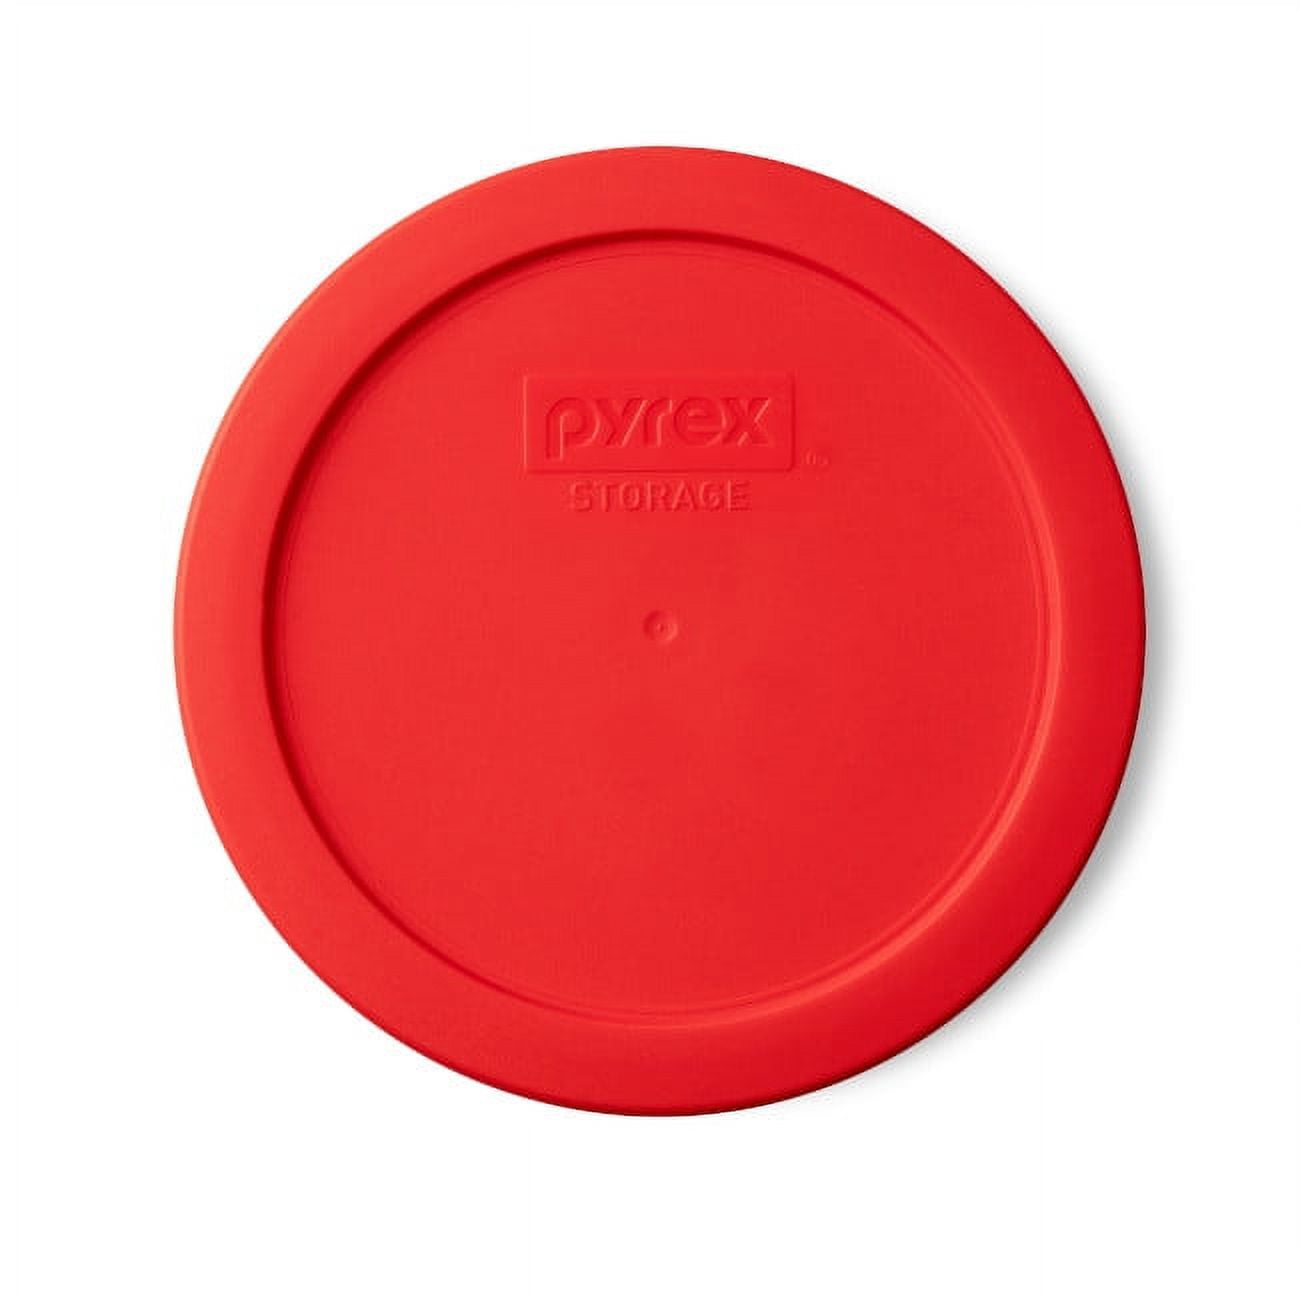 Pyrex Bake N Store 14-Piece Glass Bakeware and Storage Set with Red Lids  1119648 - The Home Depot